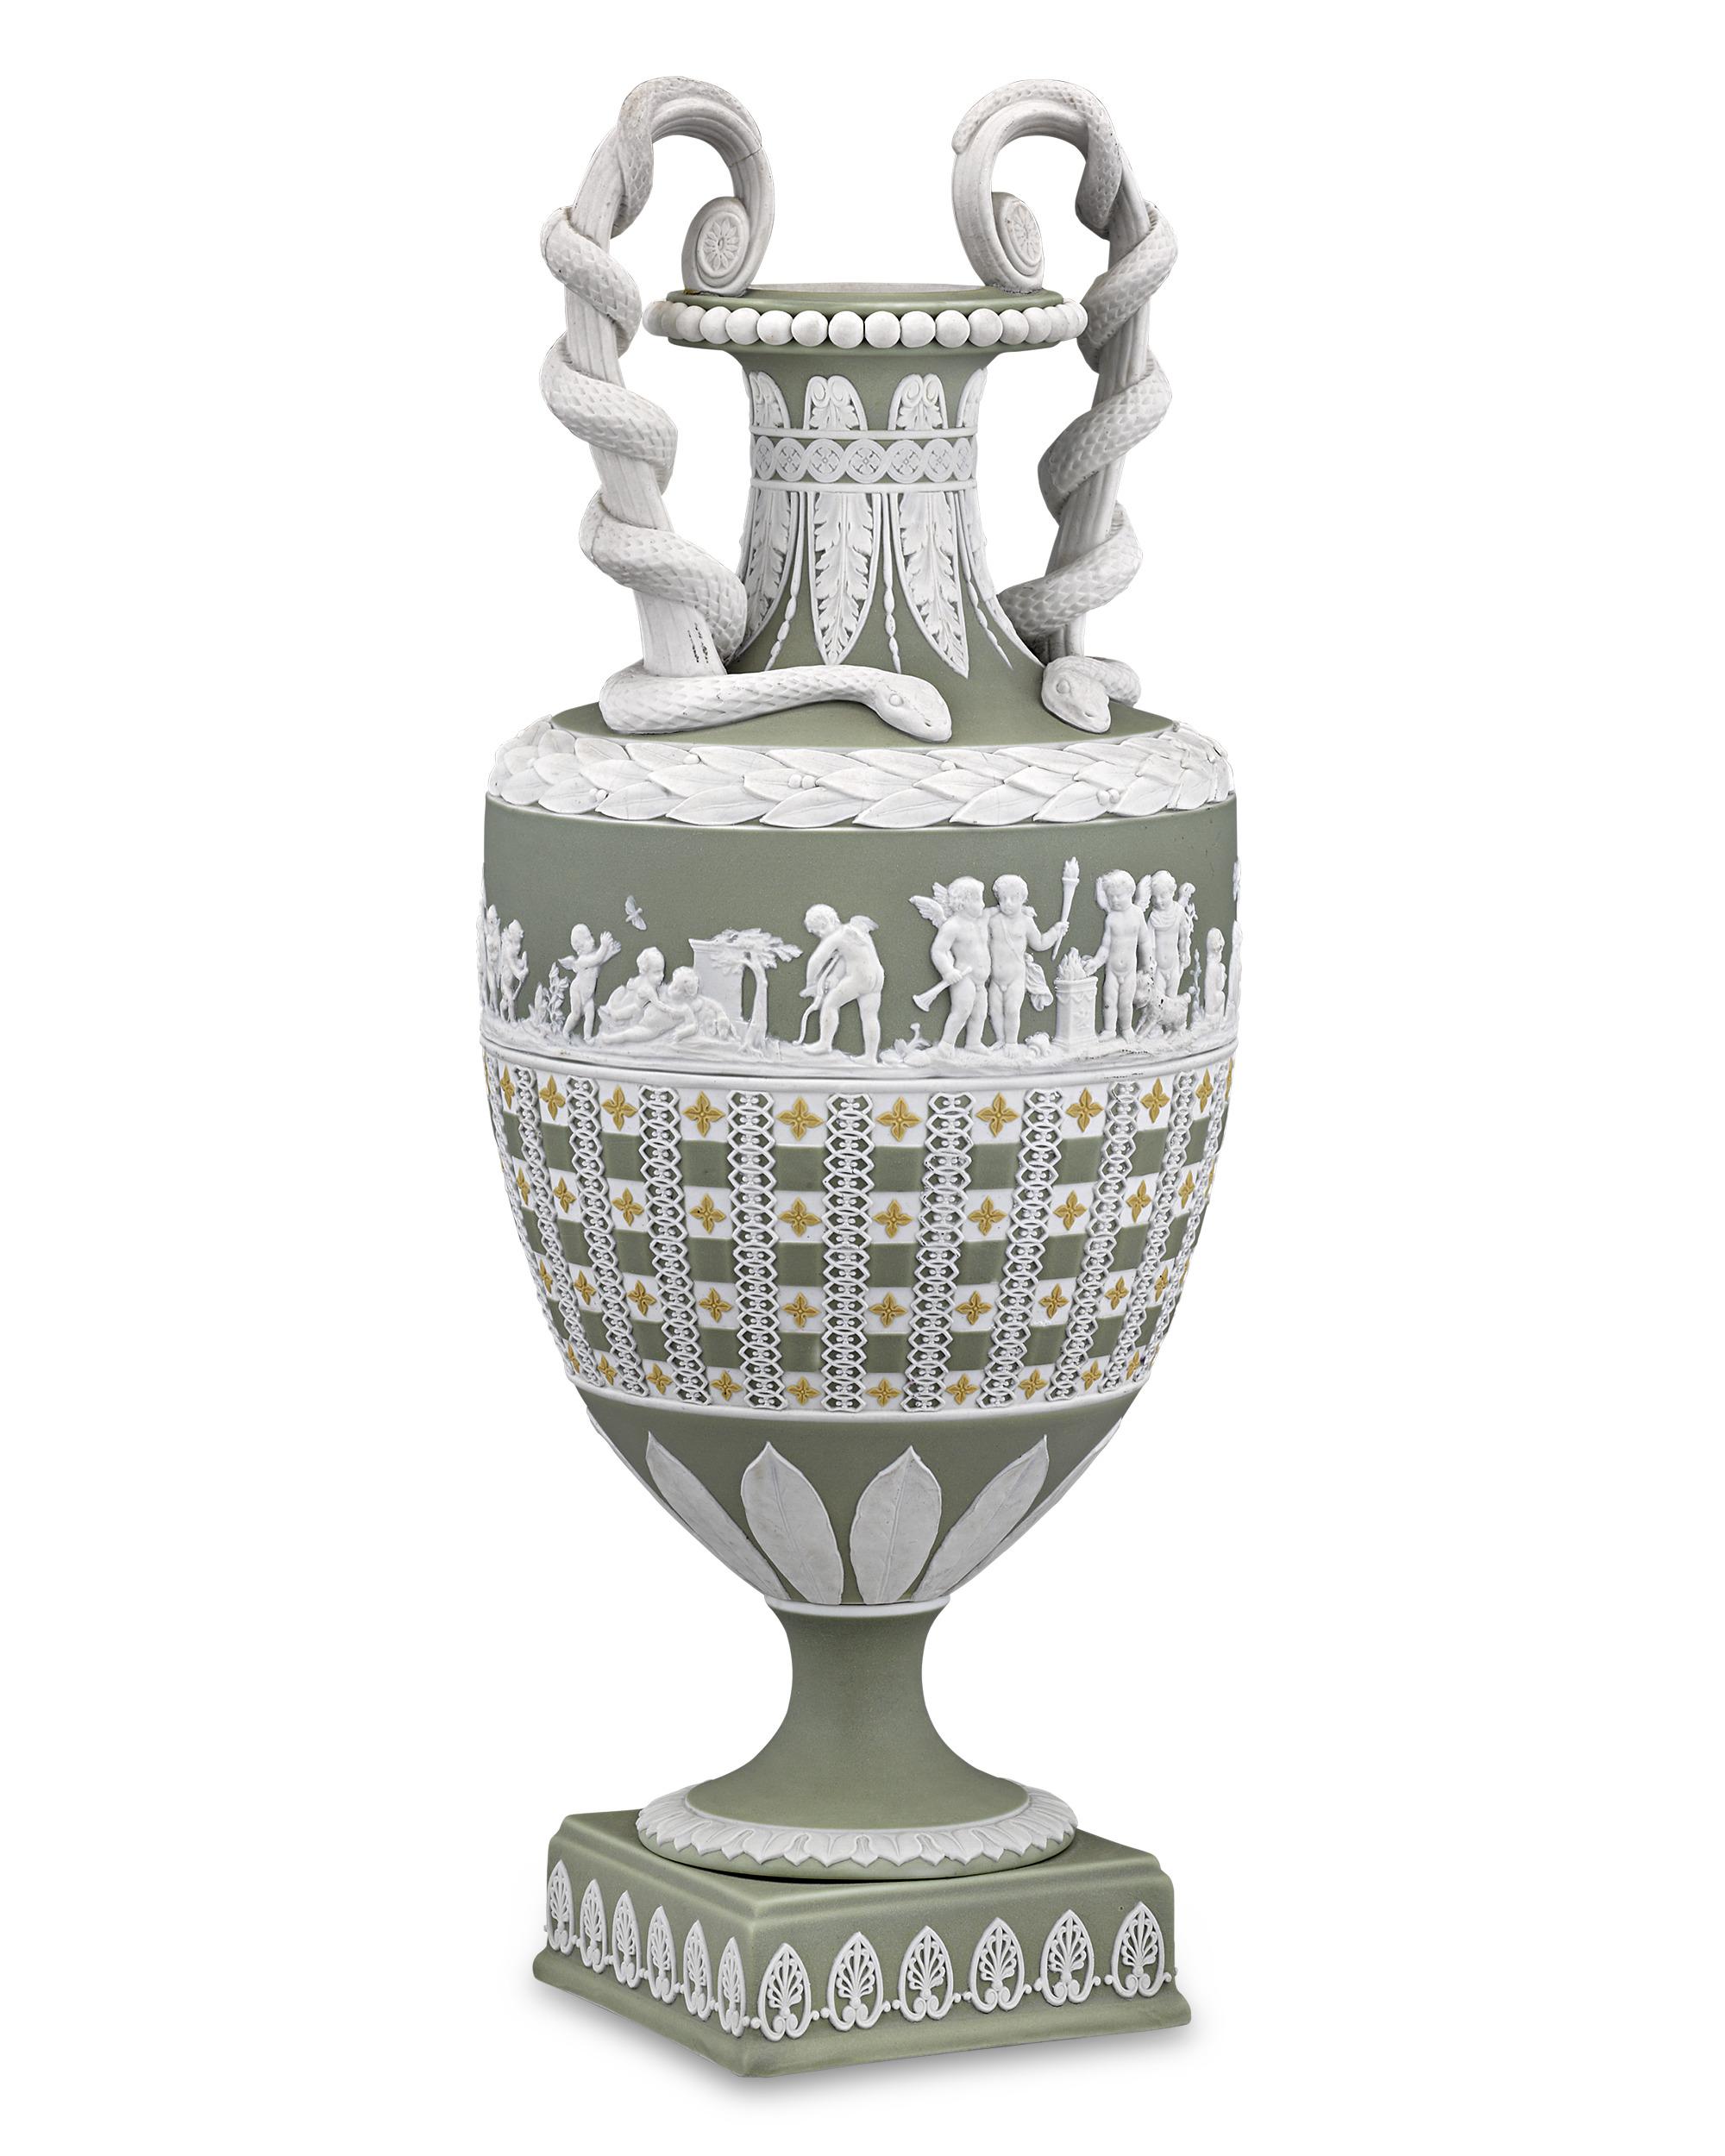 Tricolor jasperware was one of Wedgwood’s most celebrated innovations, and this exquisitely rare vase is an extraordinary example of this wondrous technique. The tall neck of the graceful amphora form is flanked by upright scroll handles entwined